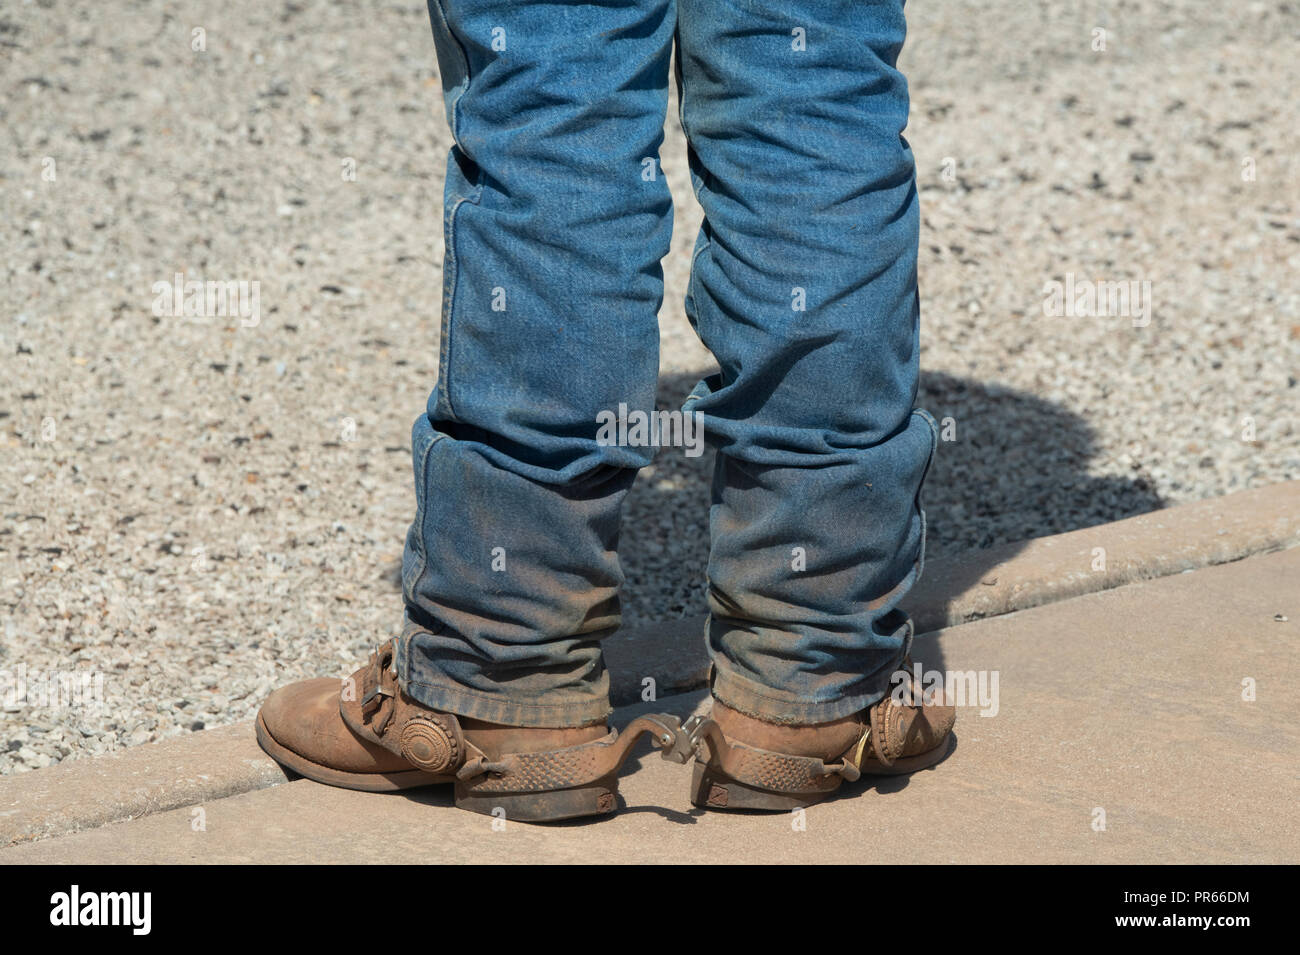 Australia, Northern Territory, Katherine. Detail of typical Outback cowboy  boots, jeans and spurs Stock Photo - Alamy